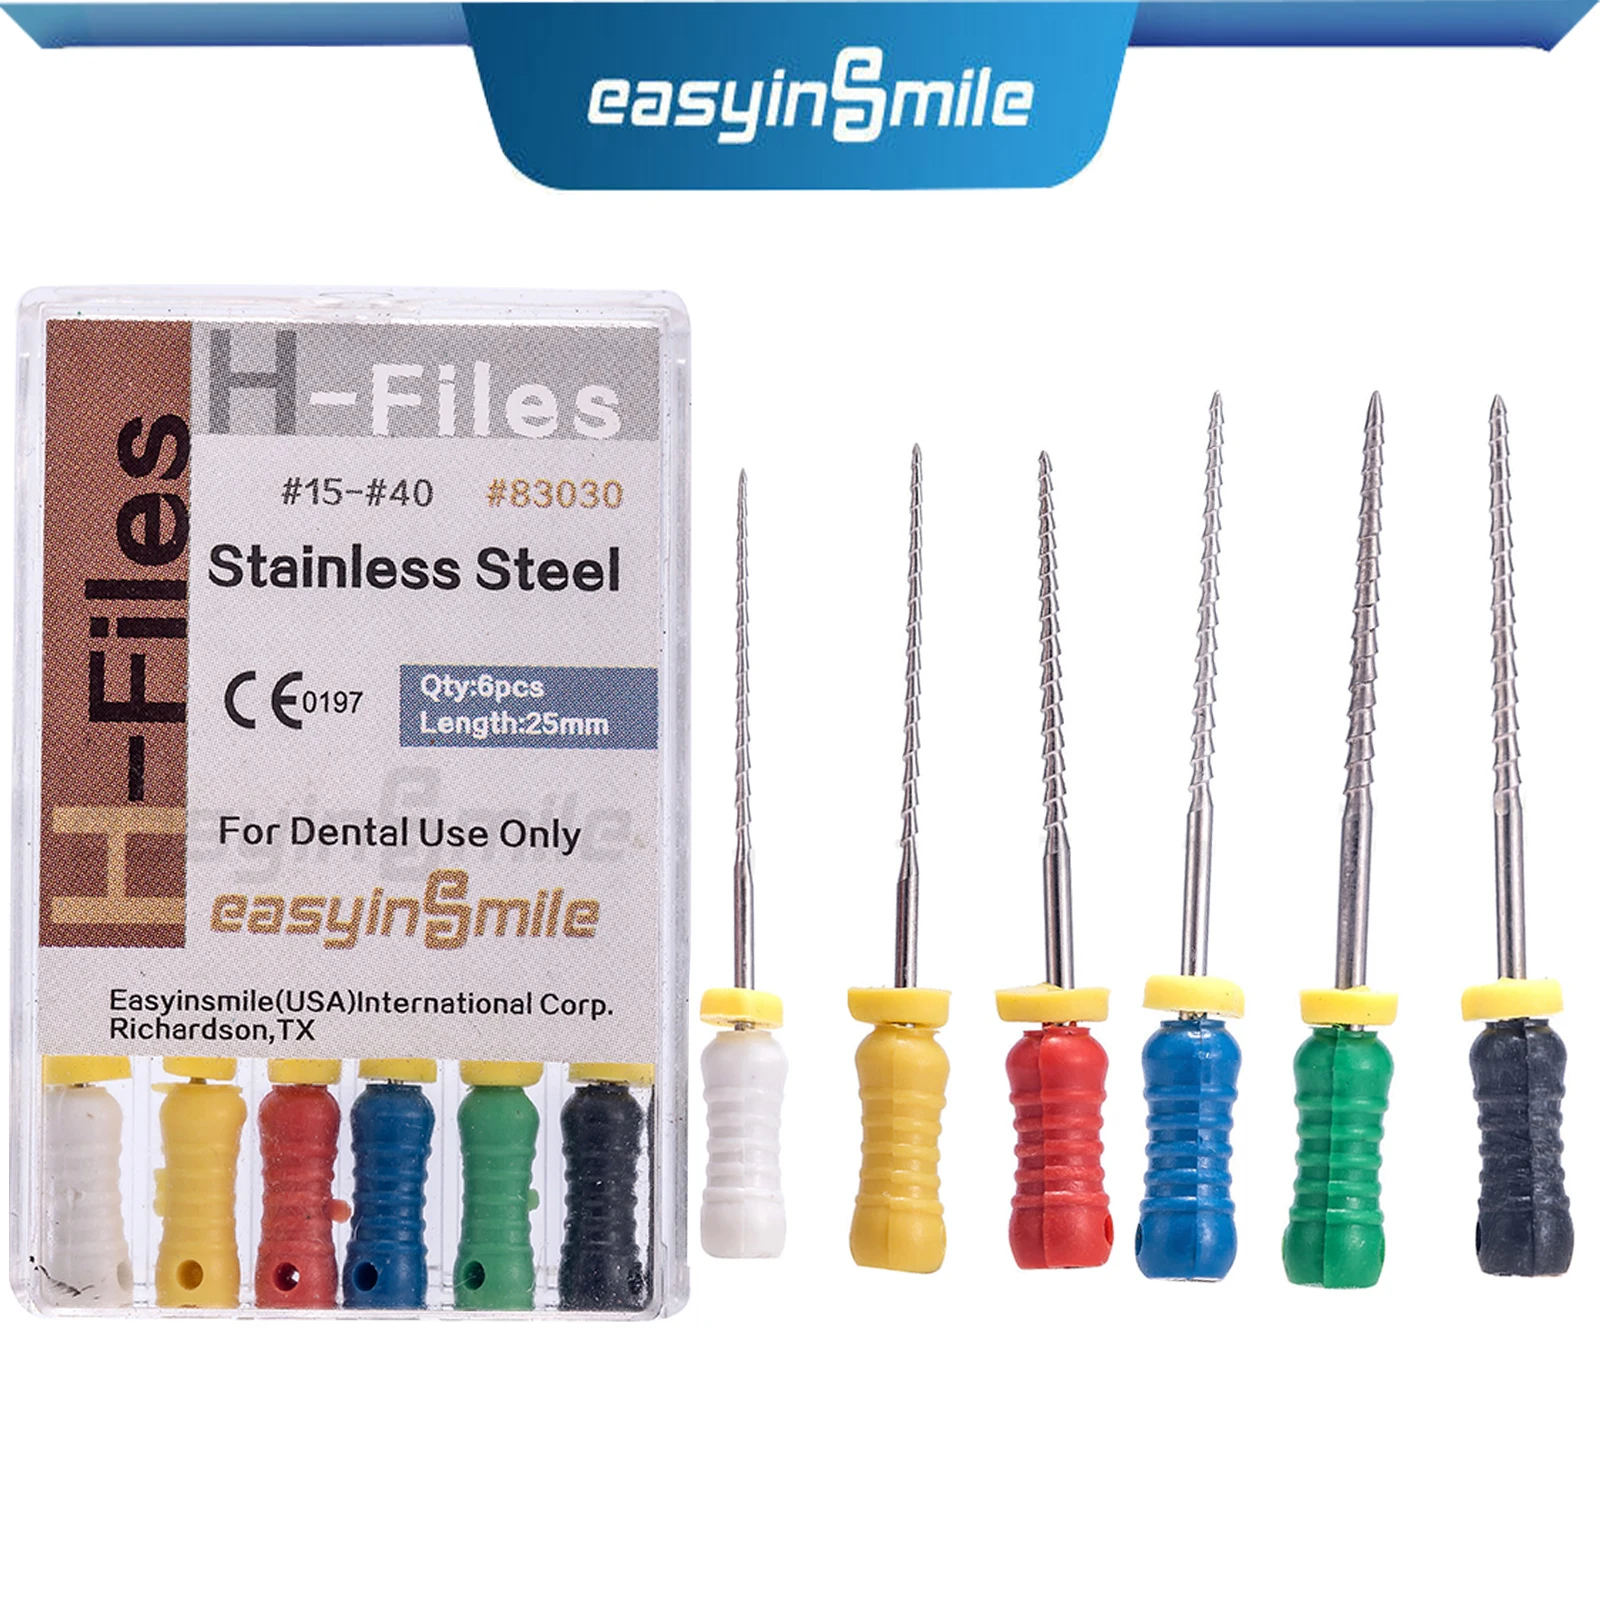 

10Packs EASYINSMILE Dental Endo Hand File H-Files Stainless Steel Hand Use for Root Canal 25MM #15-40 Flexible